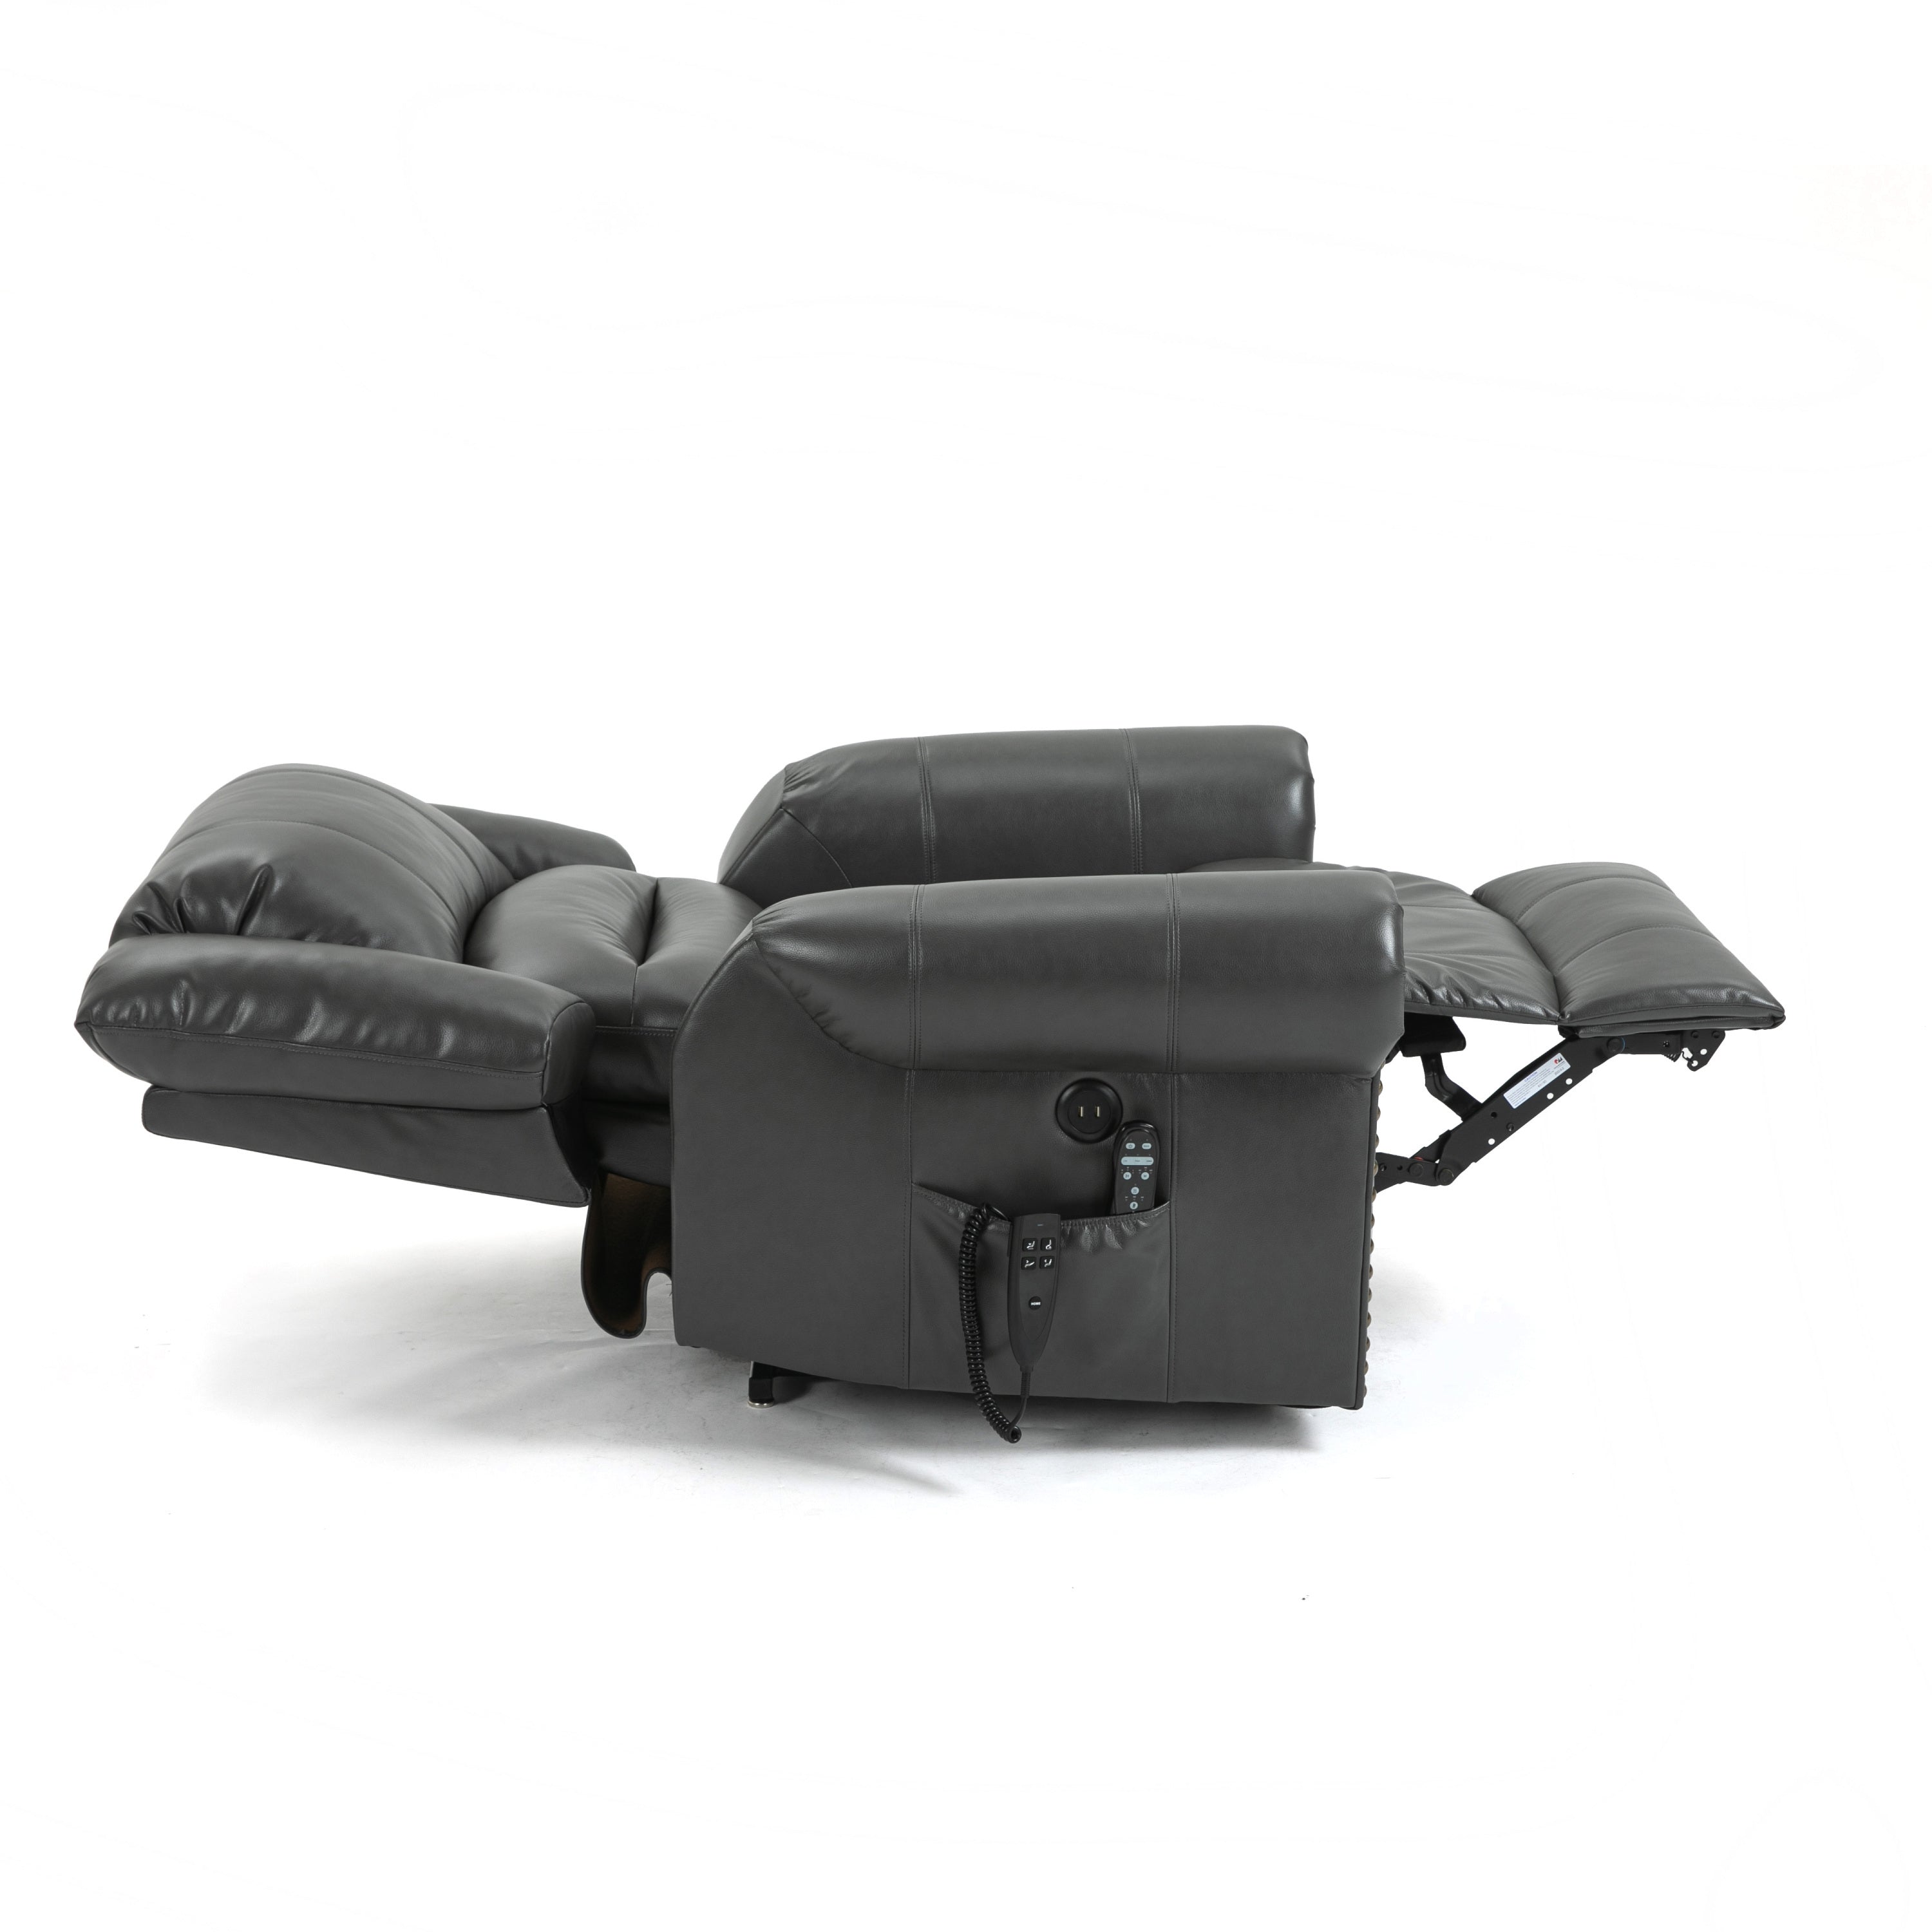 Grey Power Lift Recliner Chair with Heat, Massage, and Infinite Positioning, lay flat position